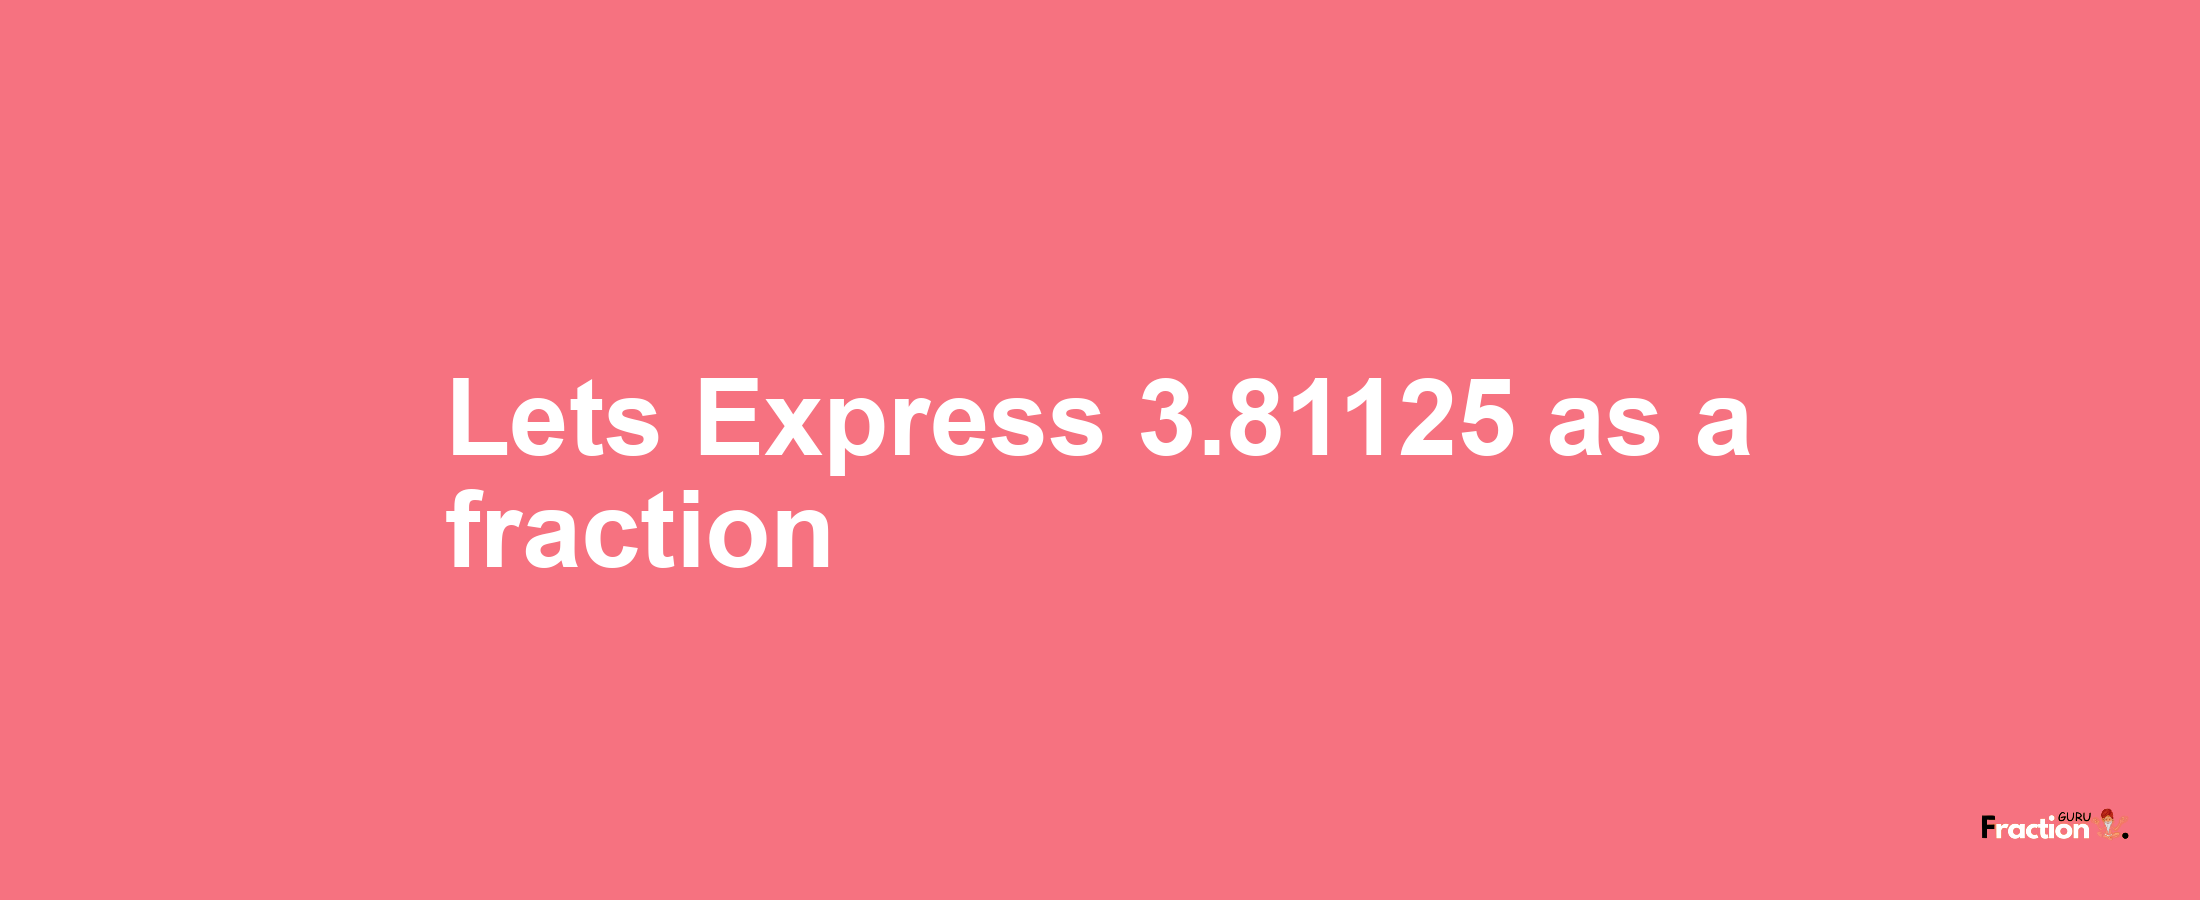 Lets Express 3.81125 as afraction